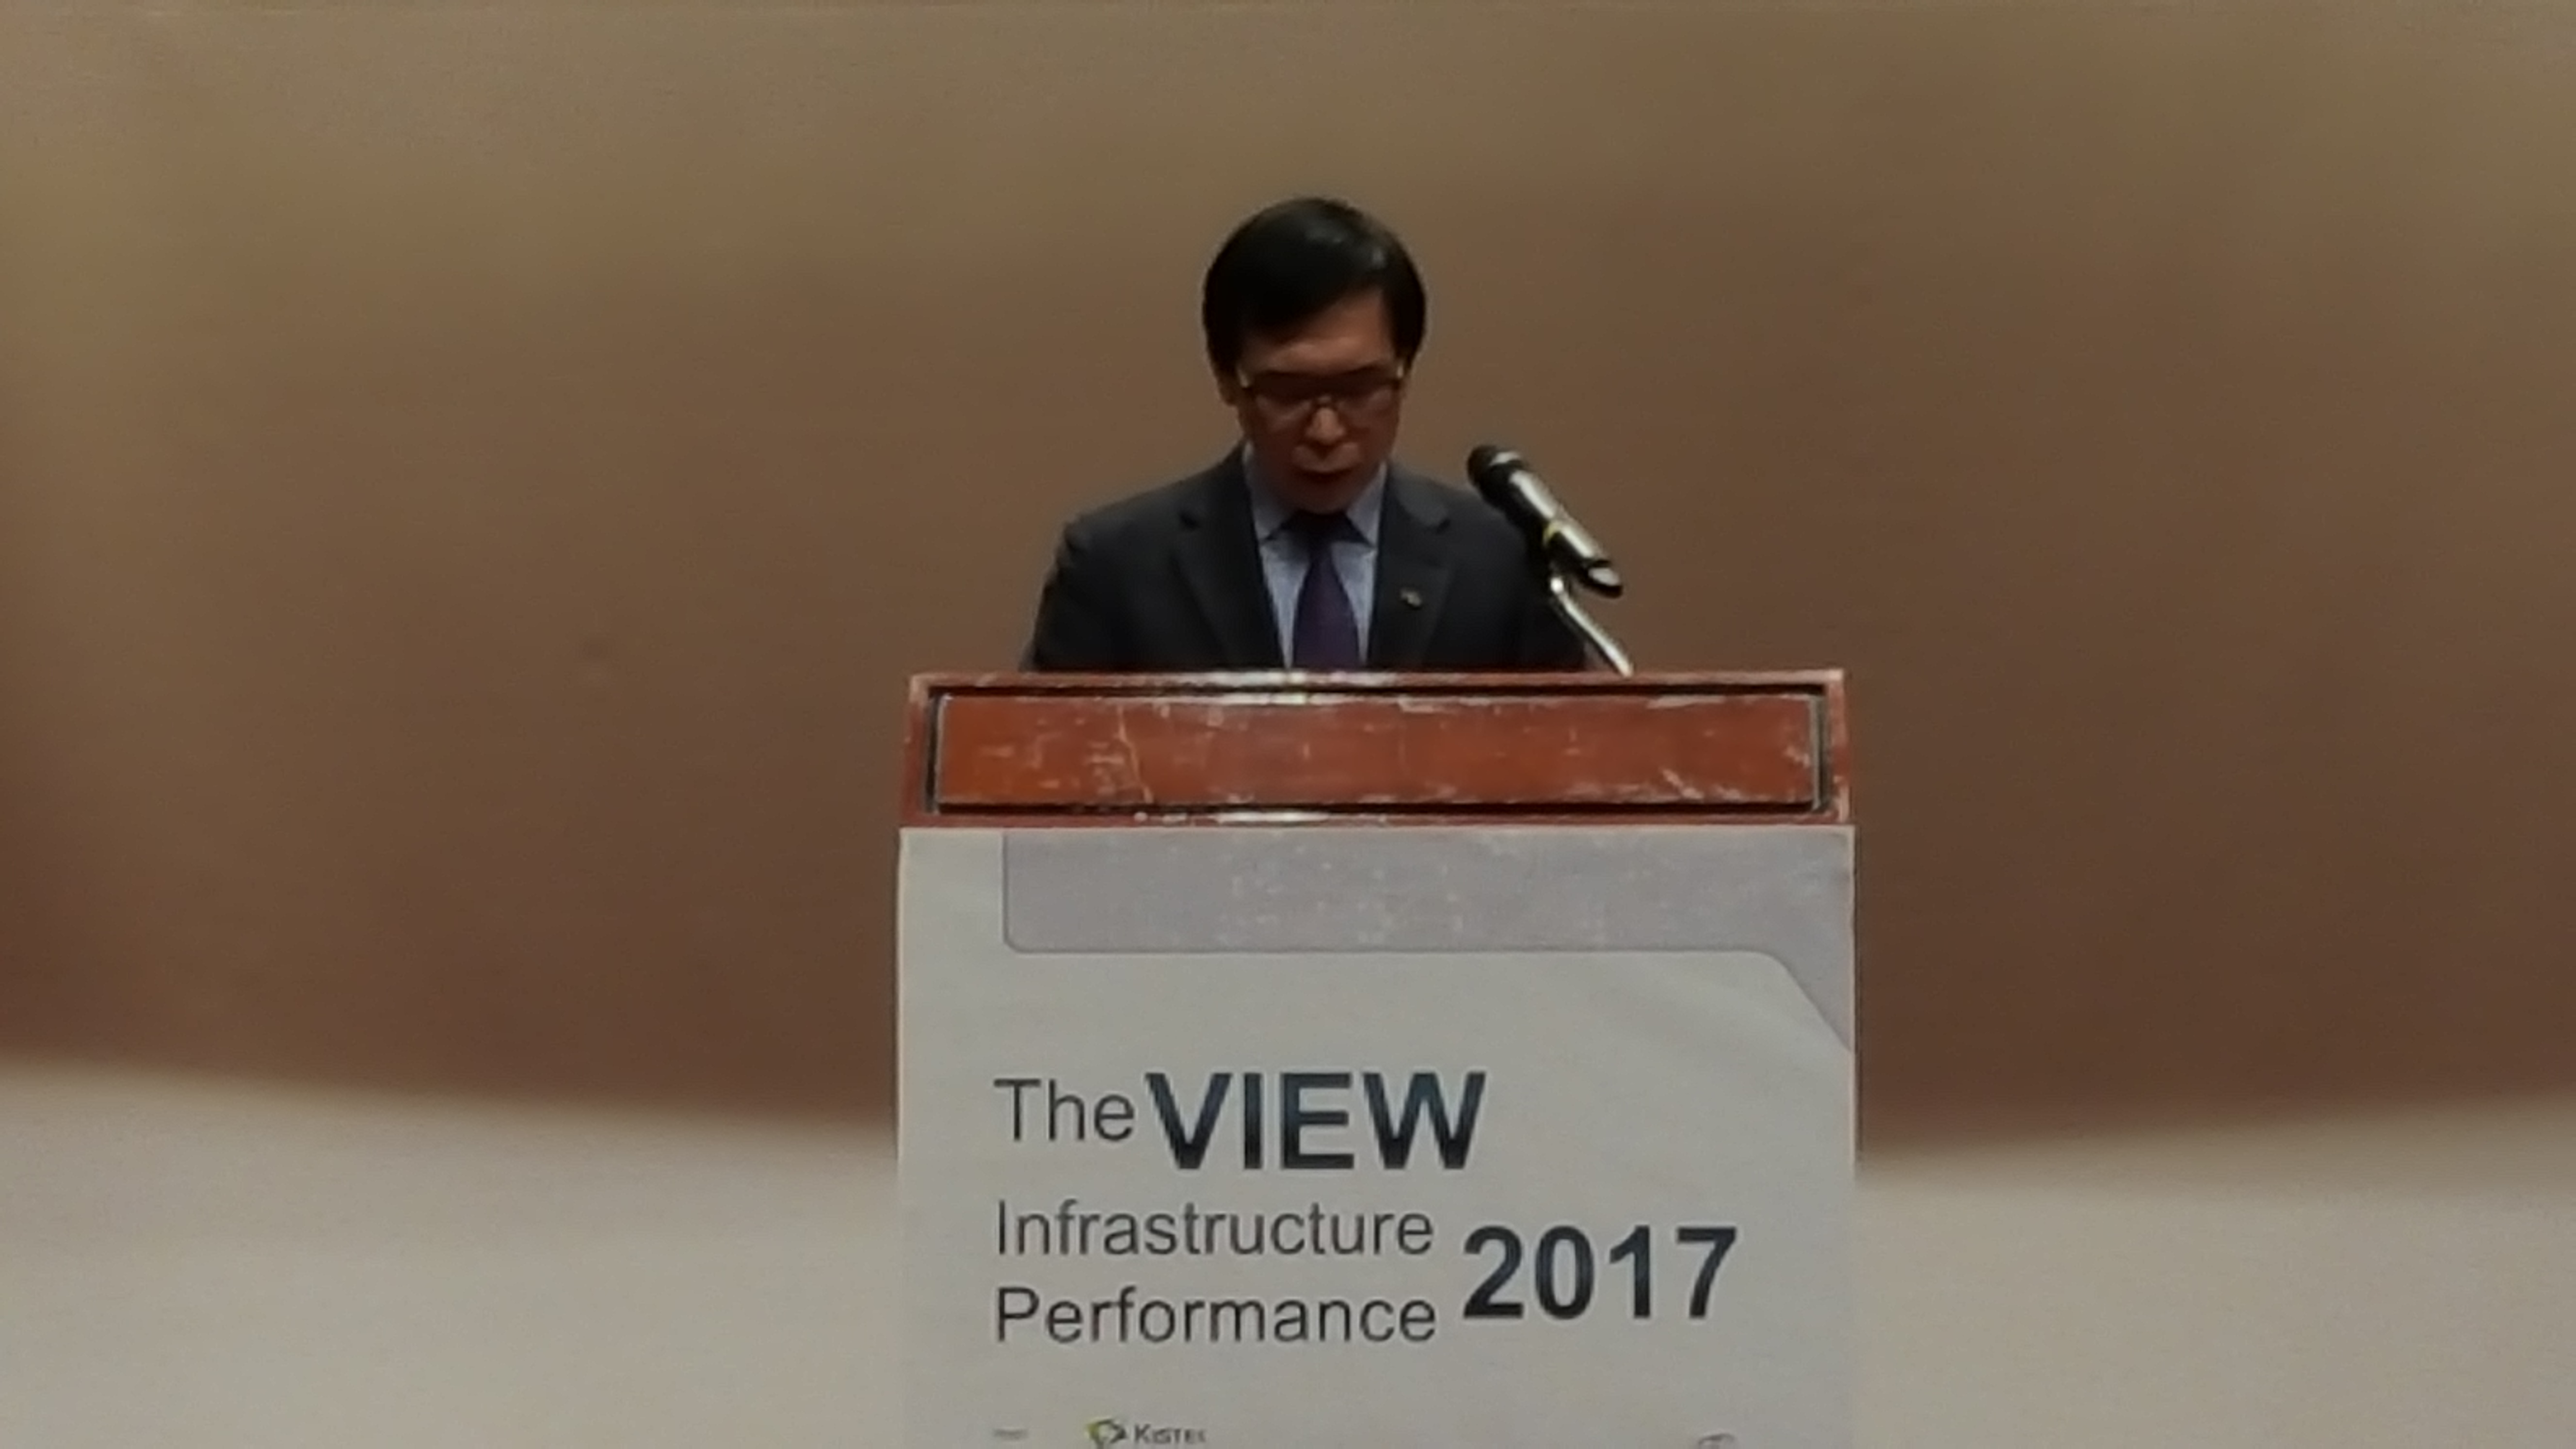 &#39;The VIEW-infrastructure Performance 2017&#39; 참석 및 축사